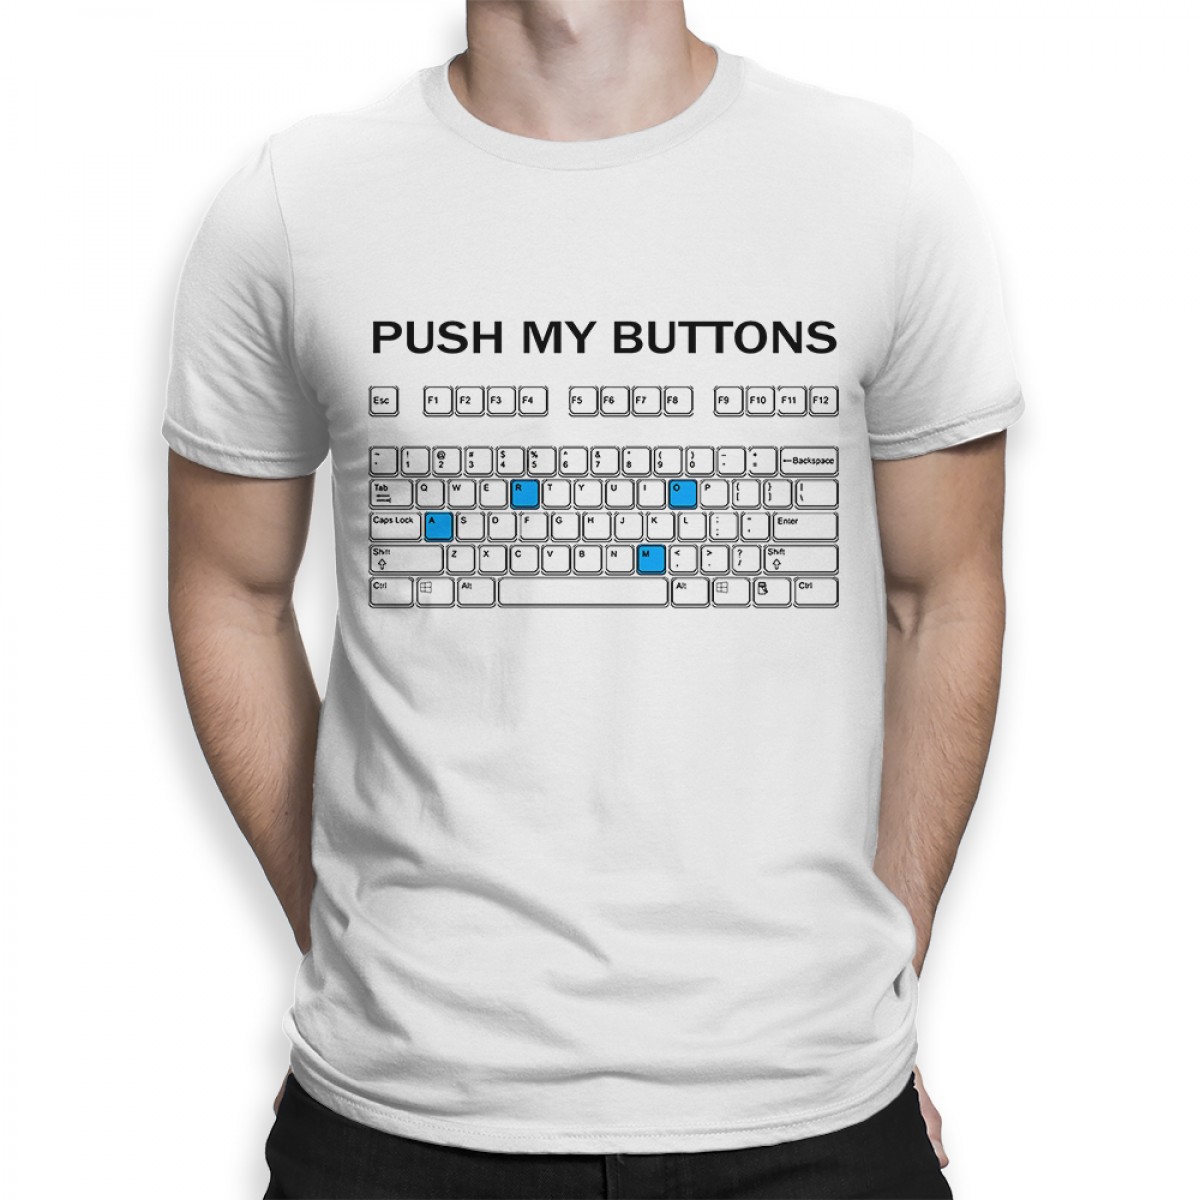 Push my Buttons.